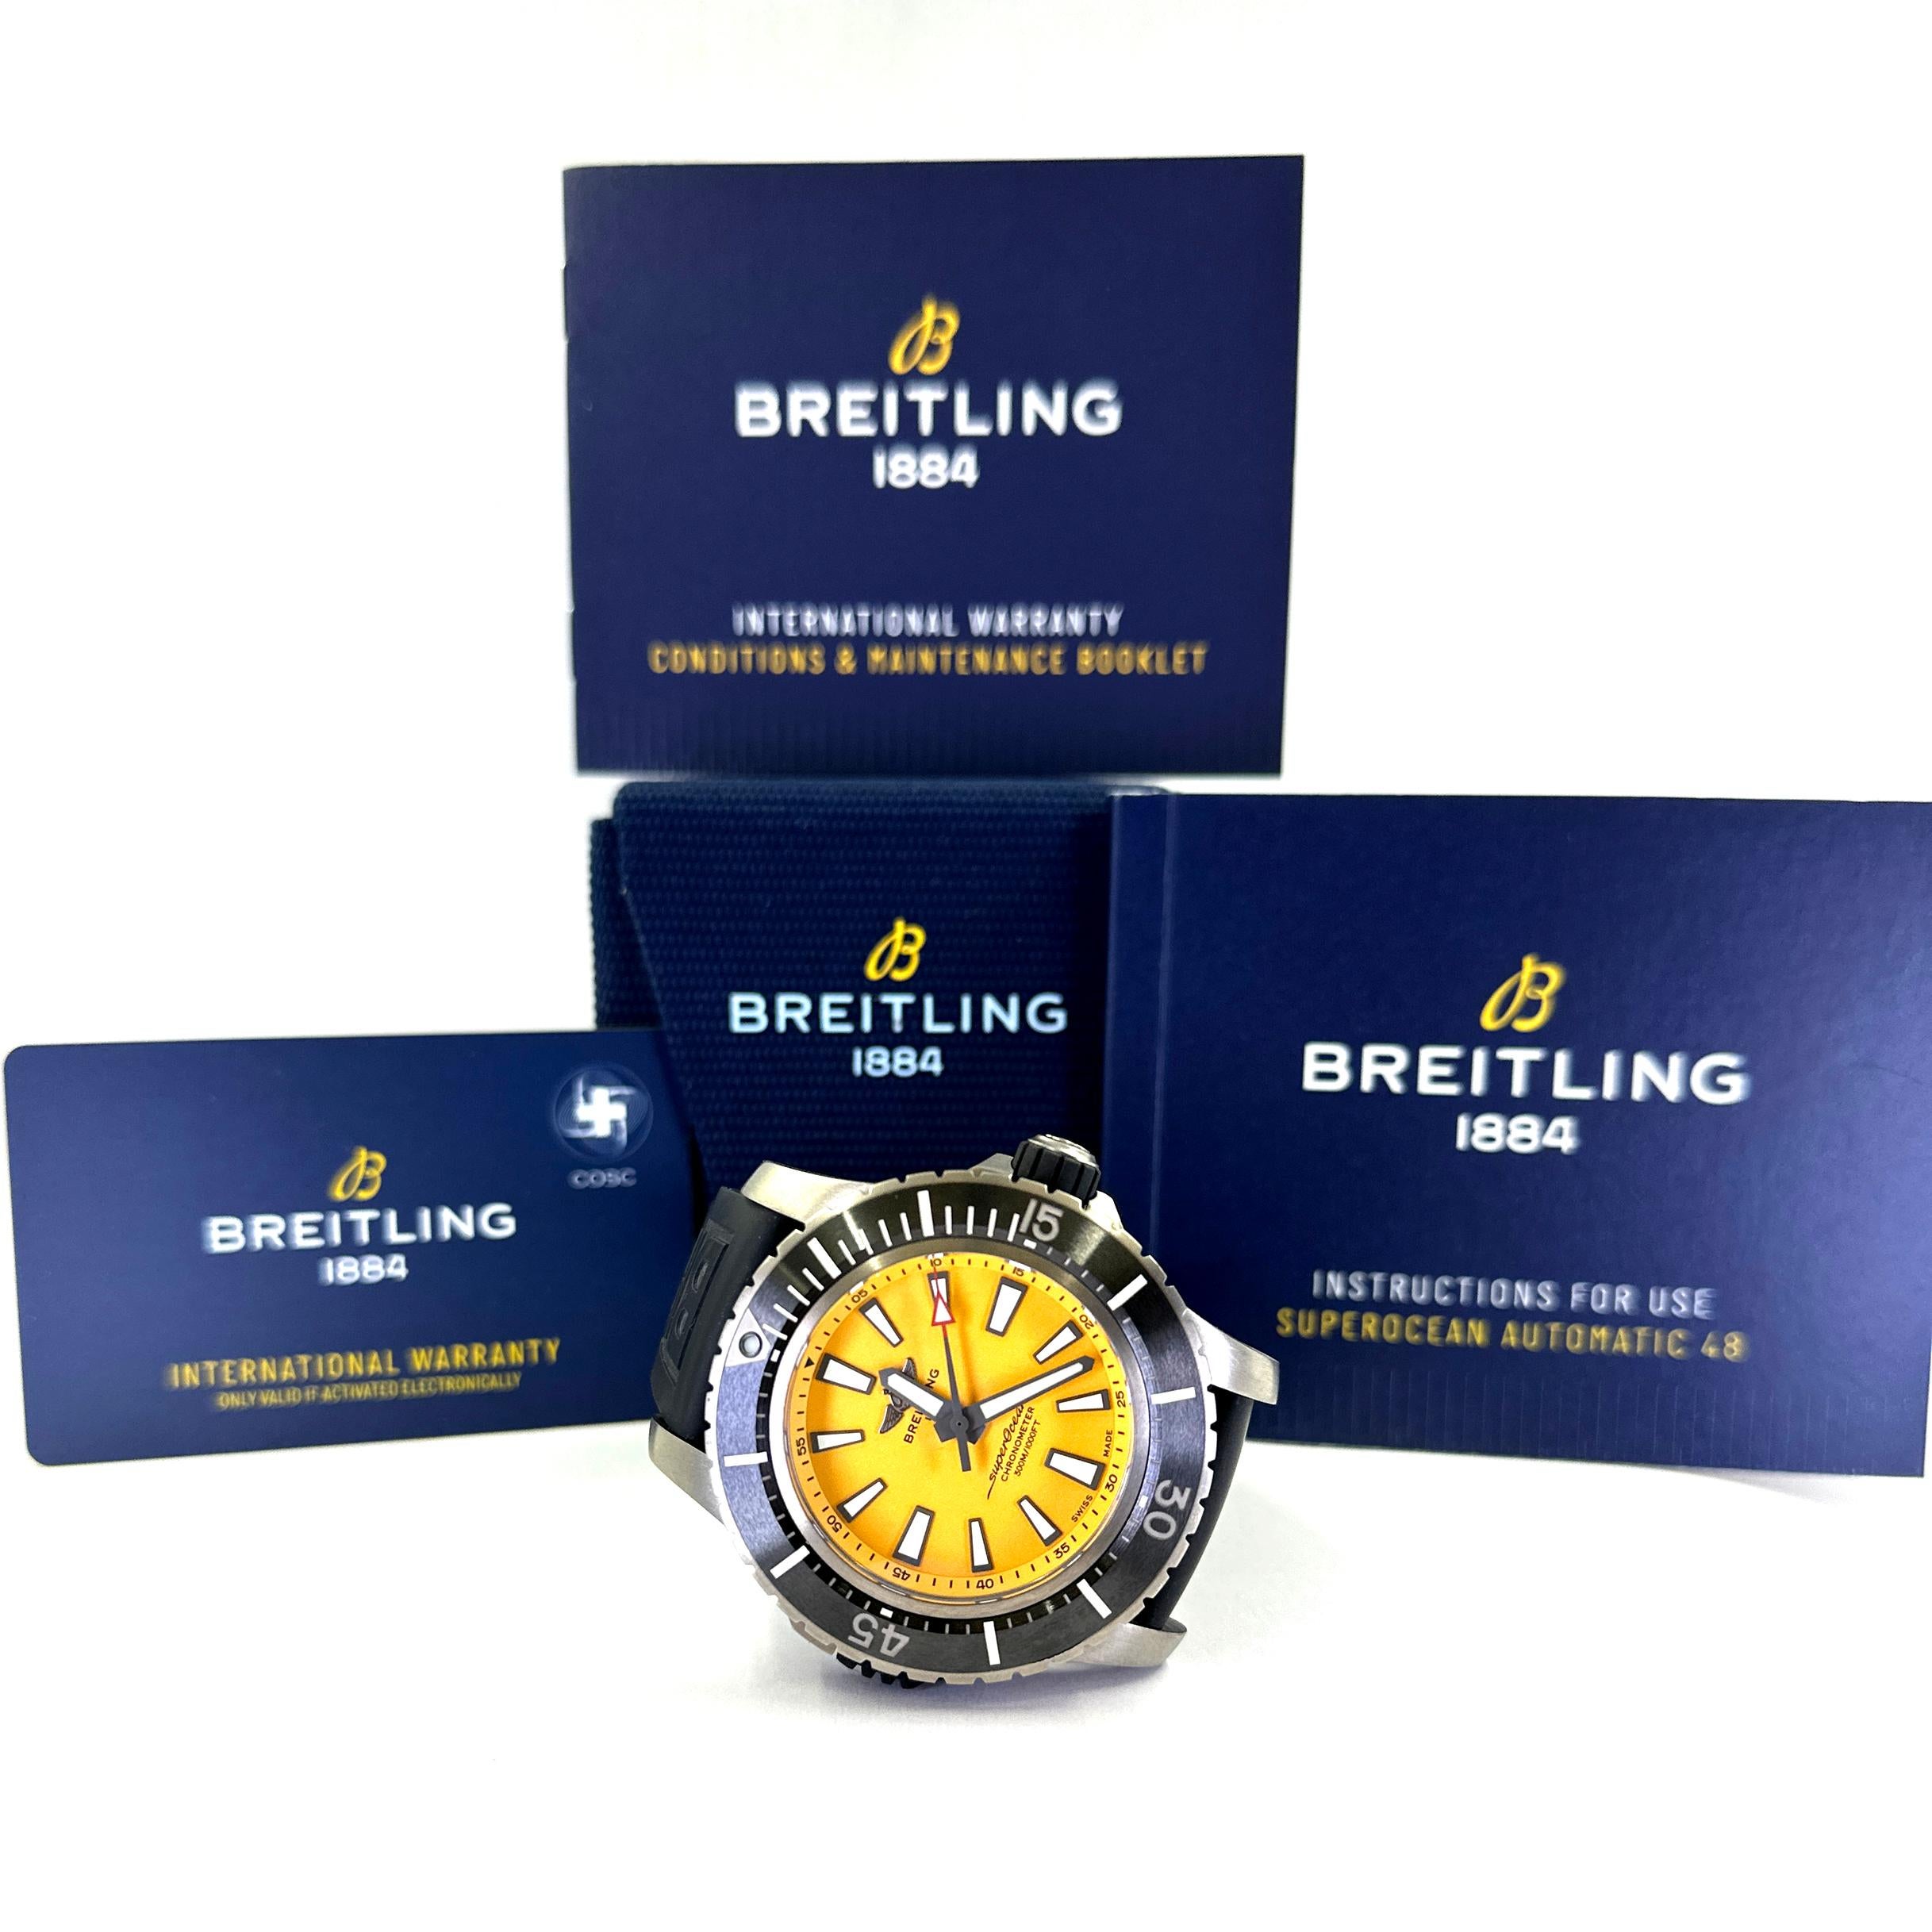 Pre-Owned Breitling Superocean Automatic 48 Watch Crafted in Titanium Featuring A Yellow Dial and Black Rubber Strap. Includes Original Box and Active Warranty Card. Model E17369.